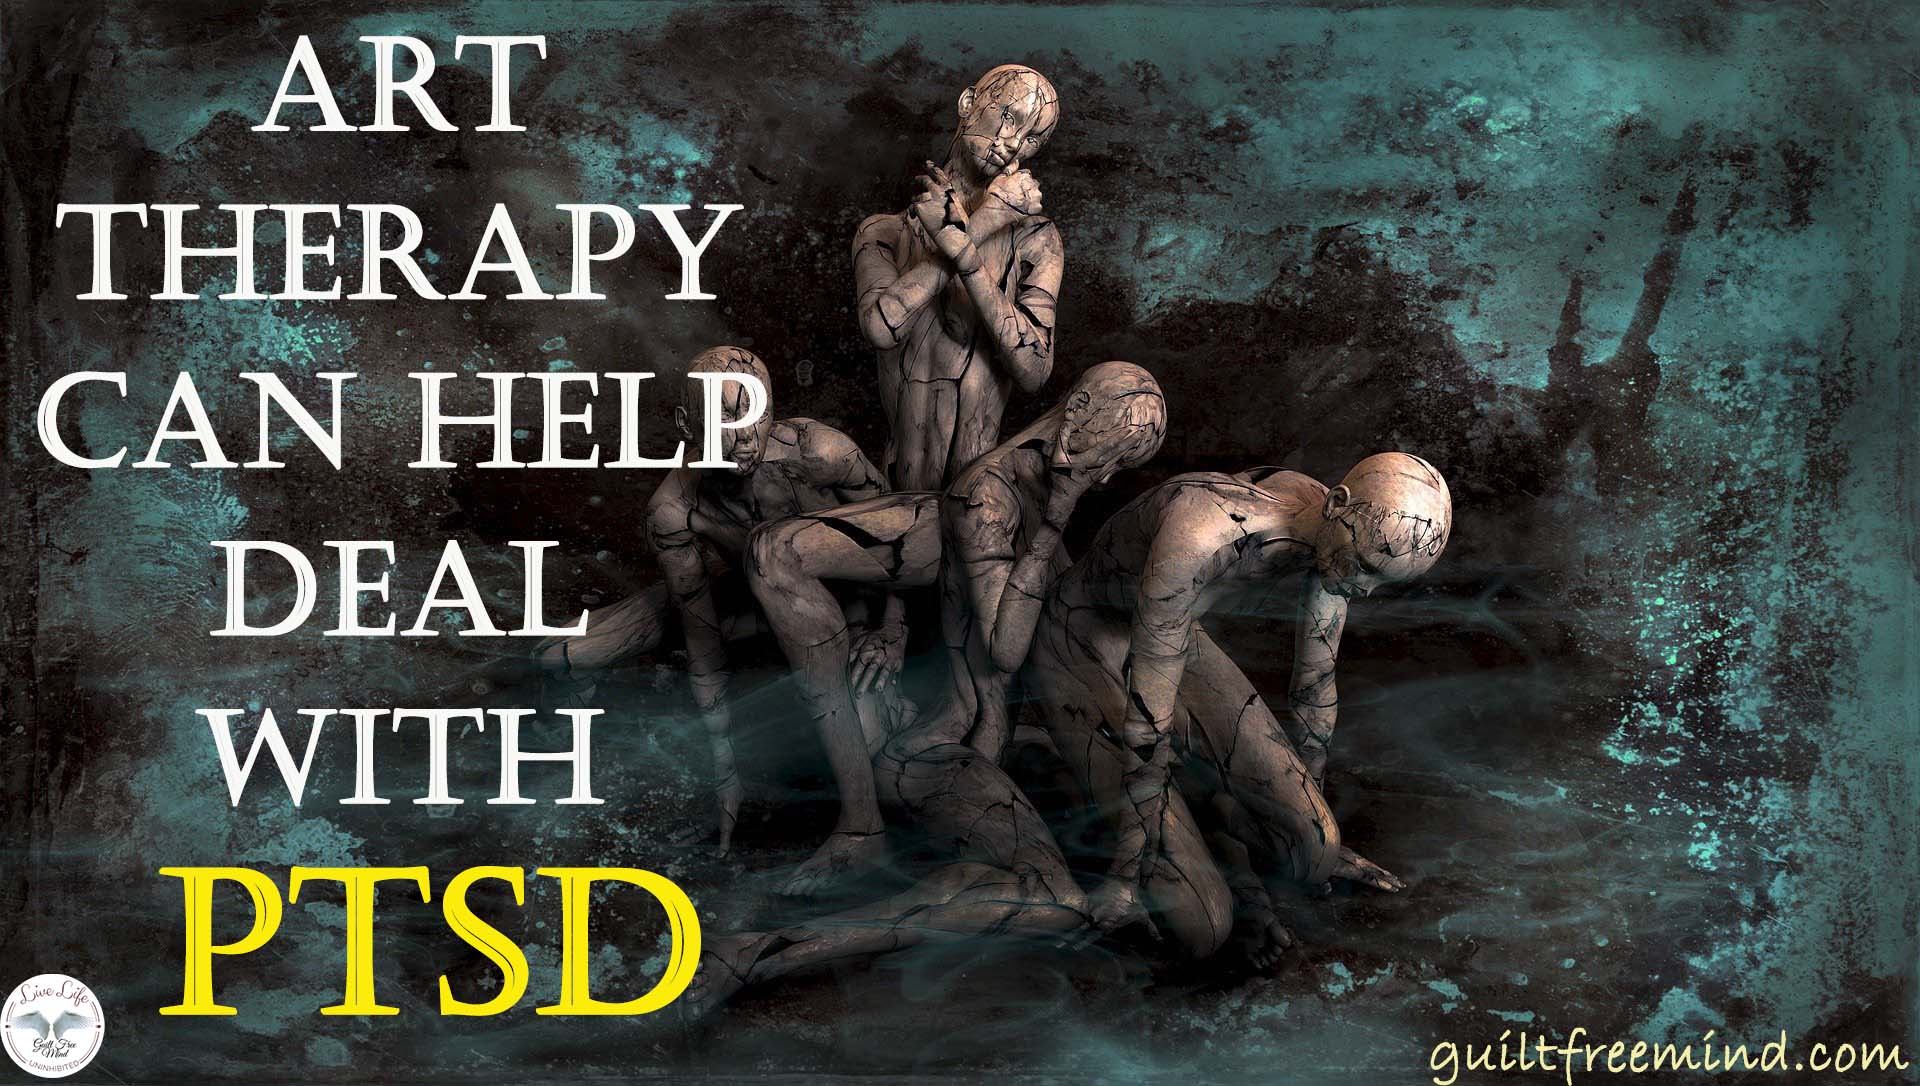 Art therapy can help deal with PTSD